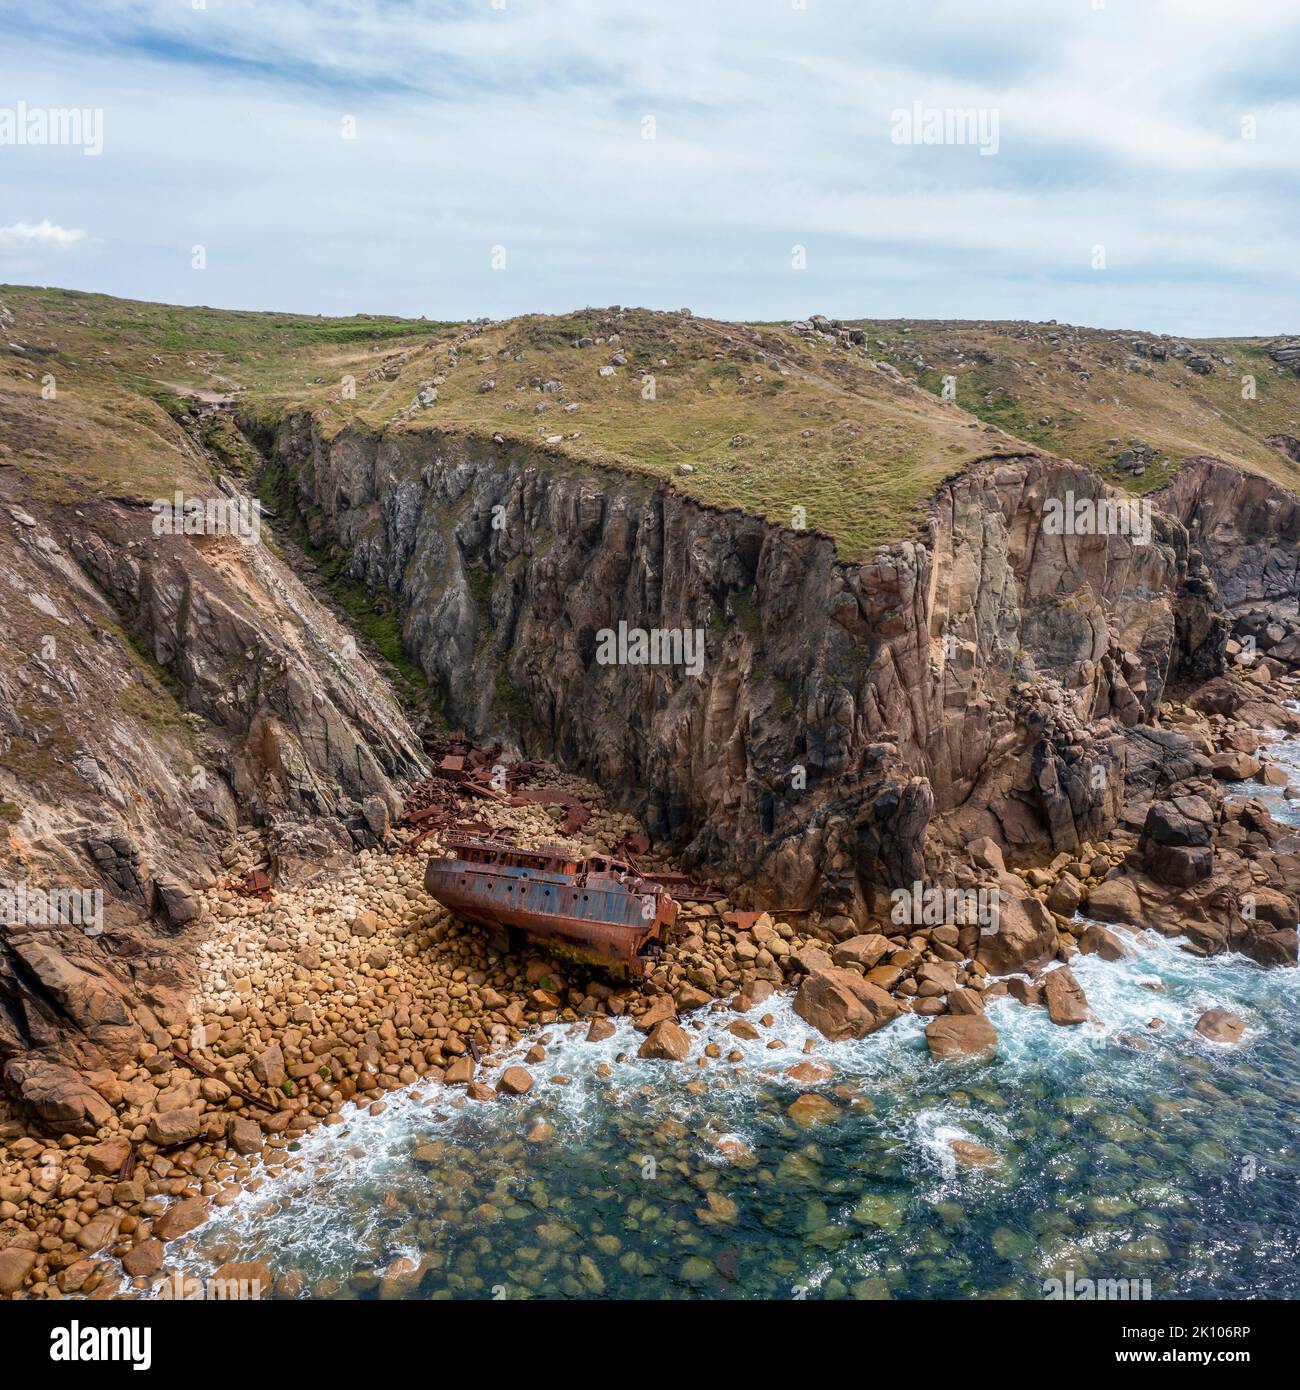 wreck of the Mulheim at sennen cove cornwall elevated view square format Stock Photo